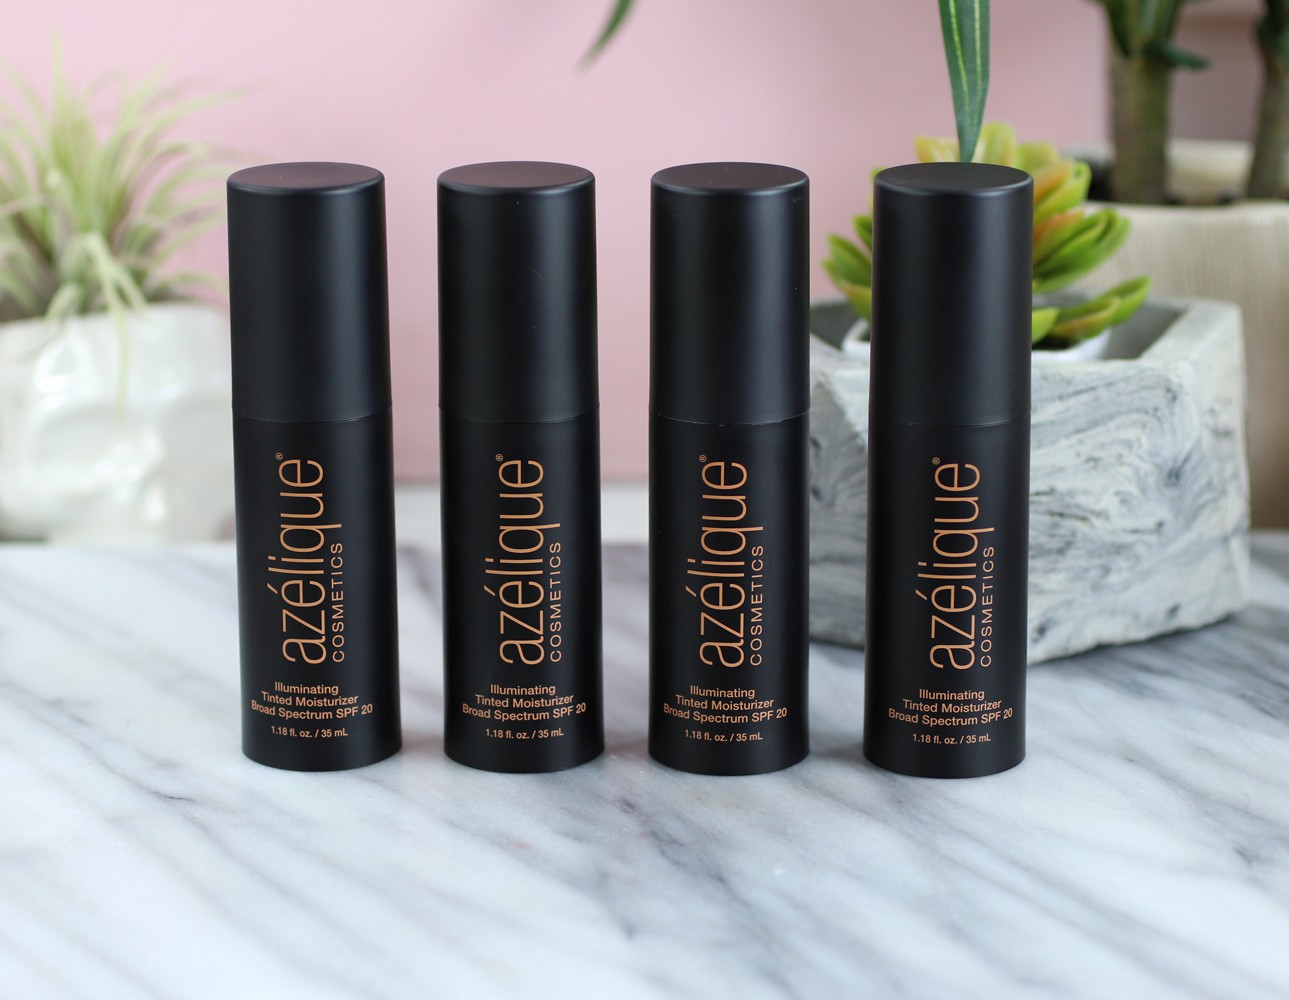 Azelique Tinted Moisturizer SPF 20 Review - Review of Azelique Cosmetics by Los Angeles cruelty free beauty blogger My Beauty Bunny